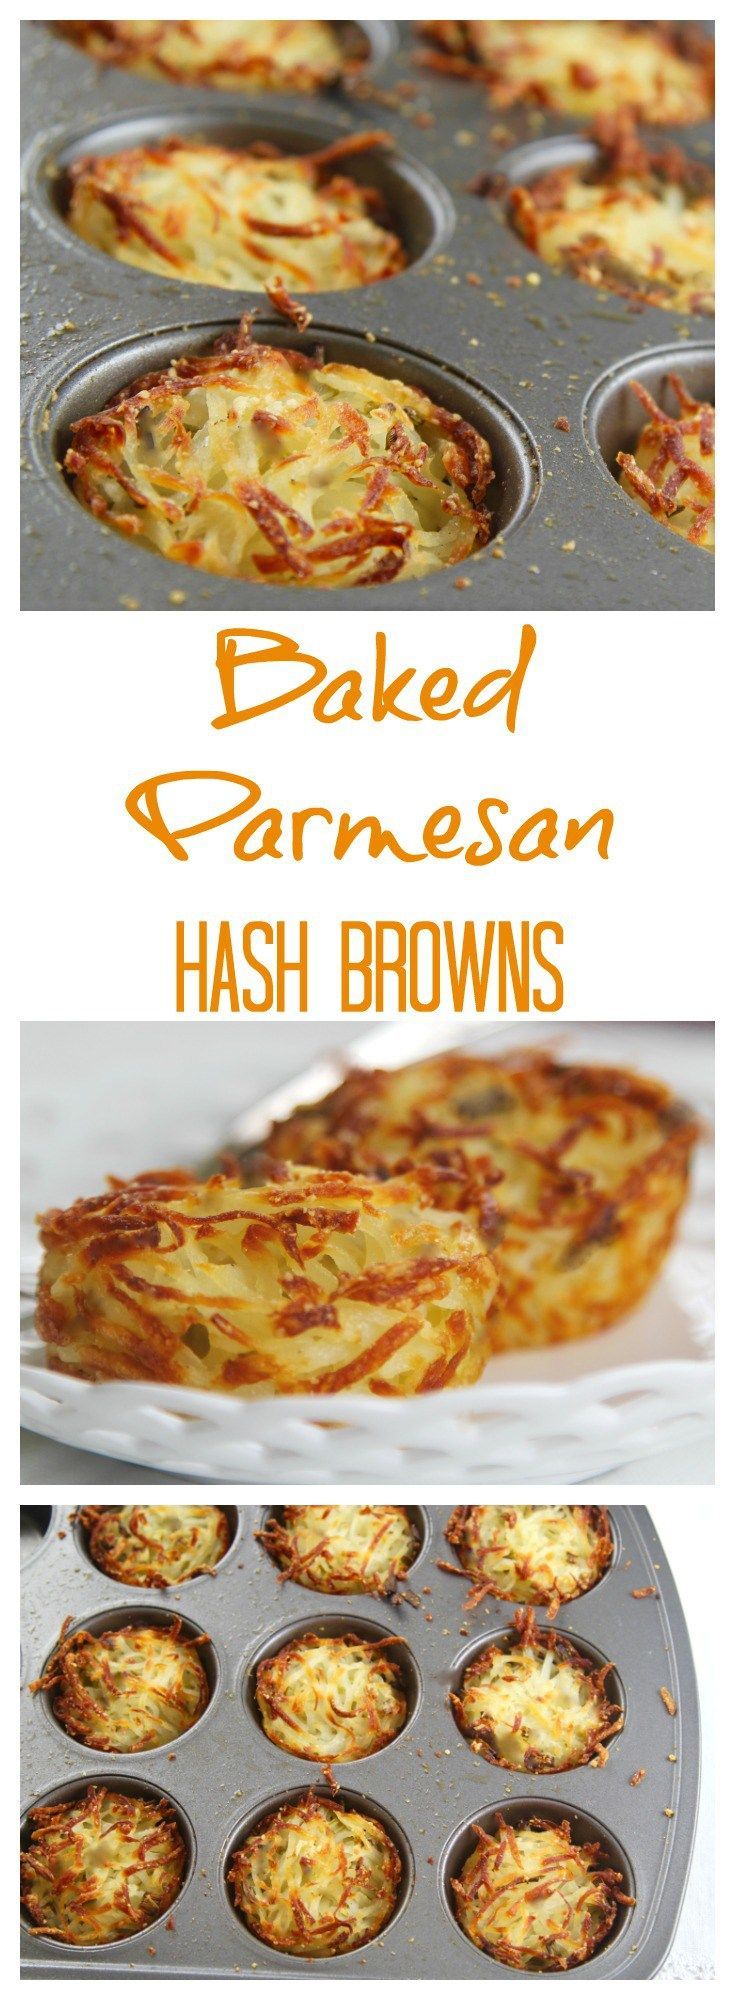 Easy parmesan hash browns baked in muffin cups for crispy edges and soft centers. Prep the night before and bake in the morning